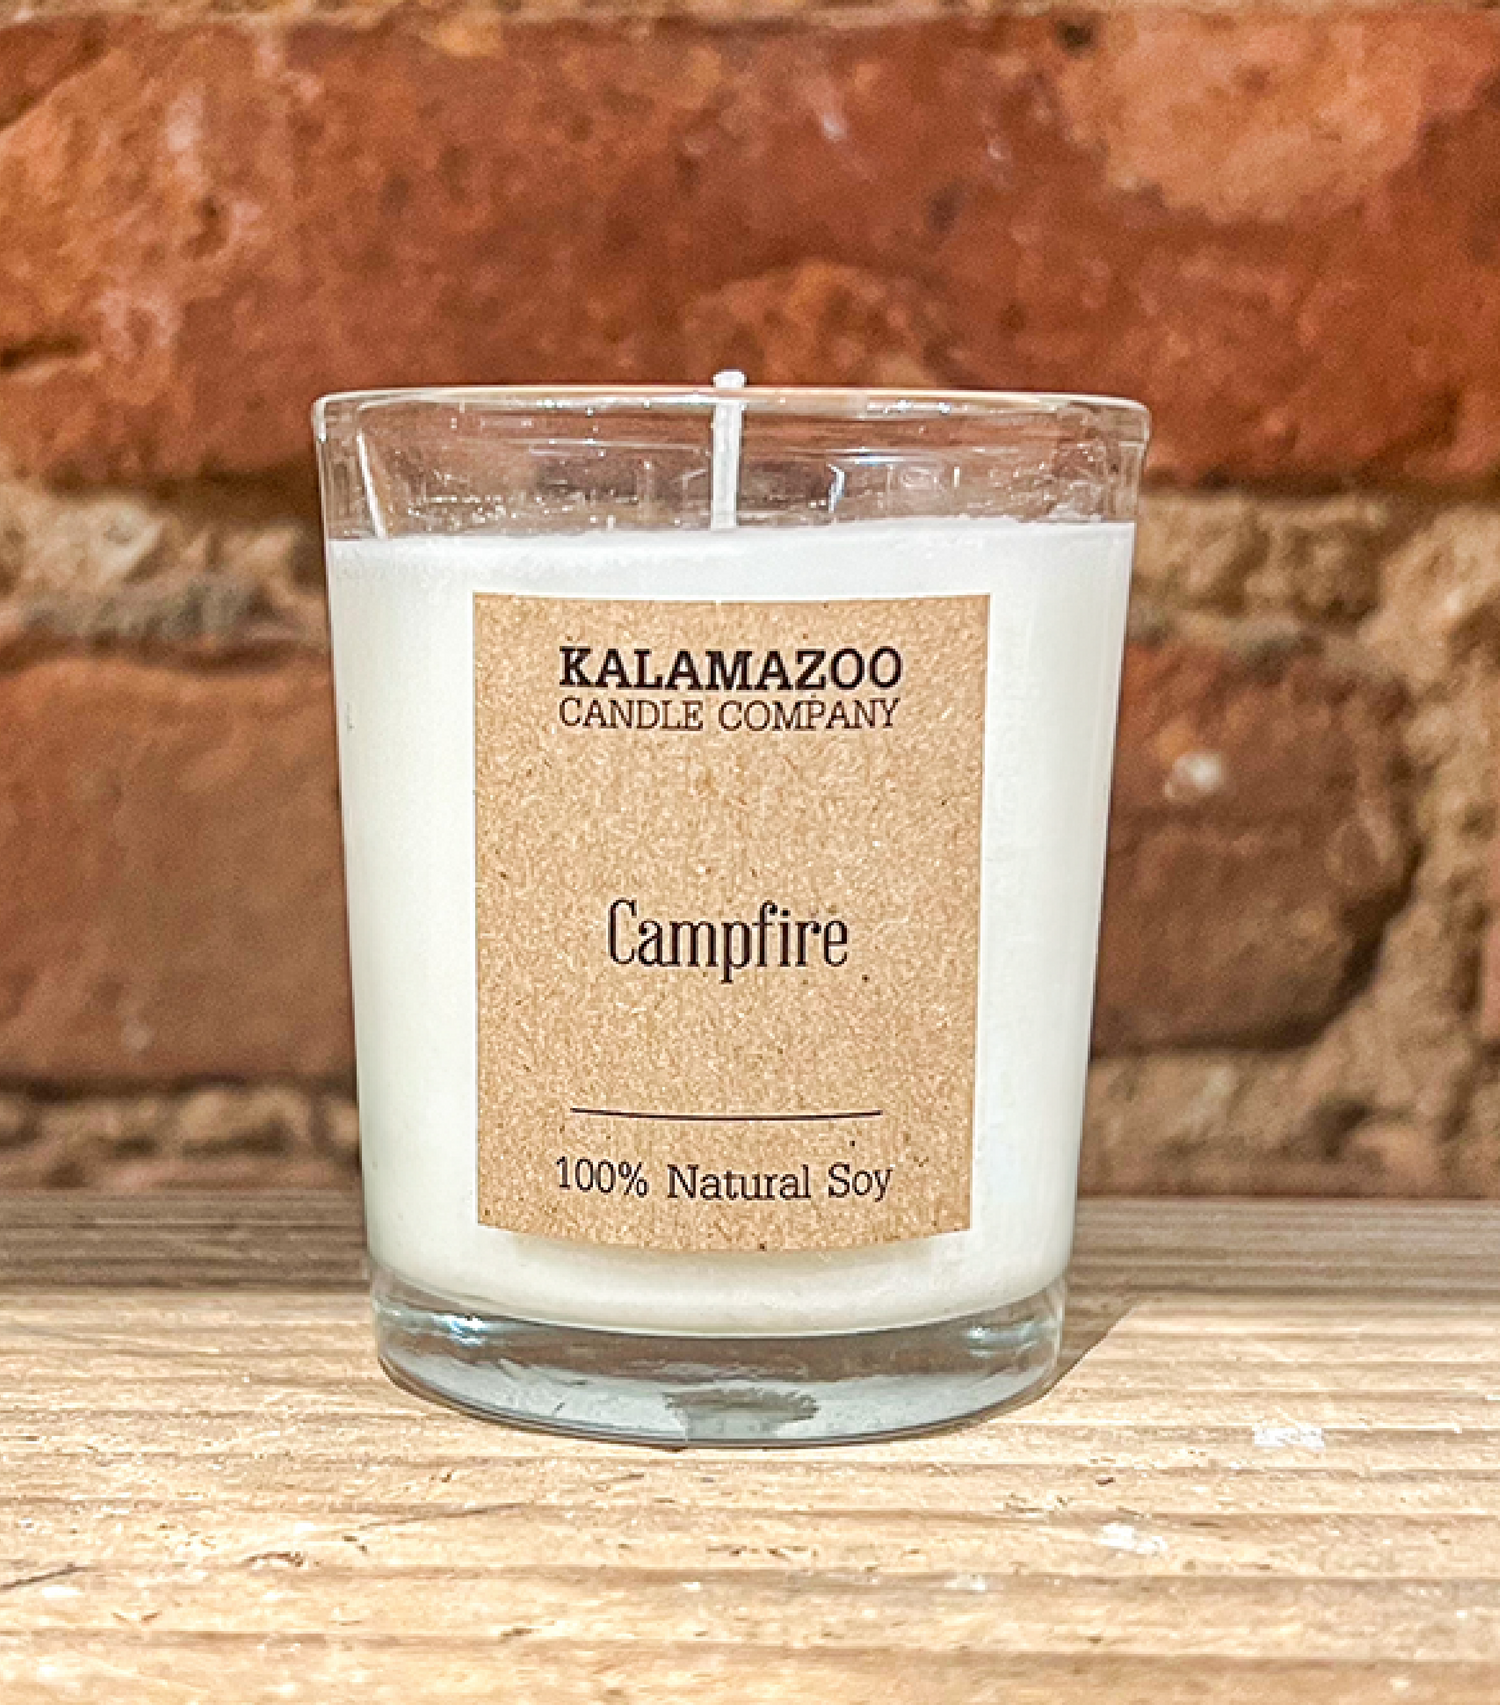 Campfire Candles Aromatic balsam and warm patchouli dappled with forest wildflowers ignites memories with this classically cozy soy candle. All Kalamazoo Candles are: 100% natural scented soy wax; produced using locally sourced and American-made materials